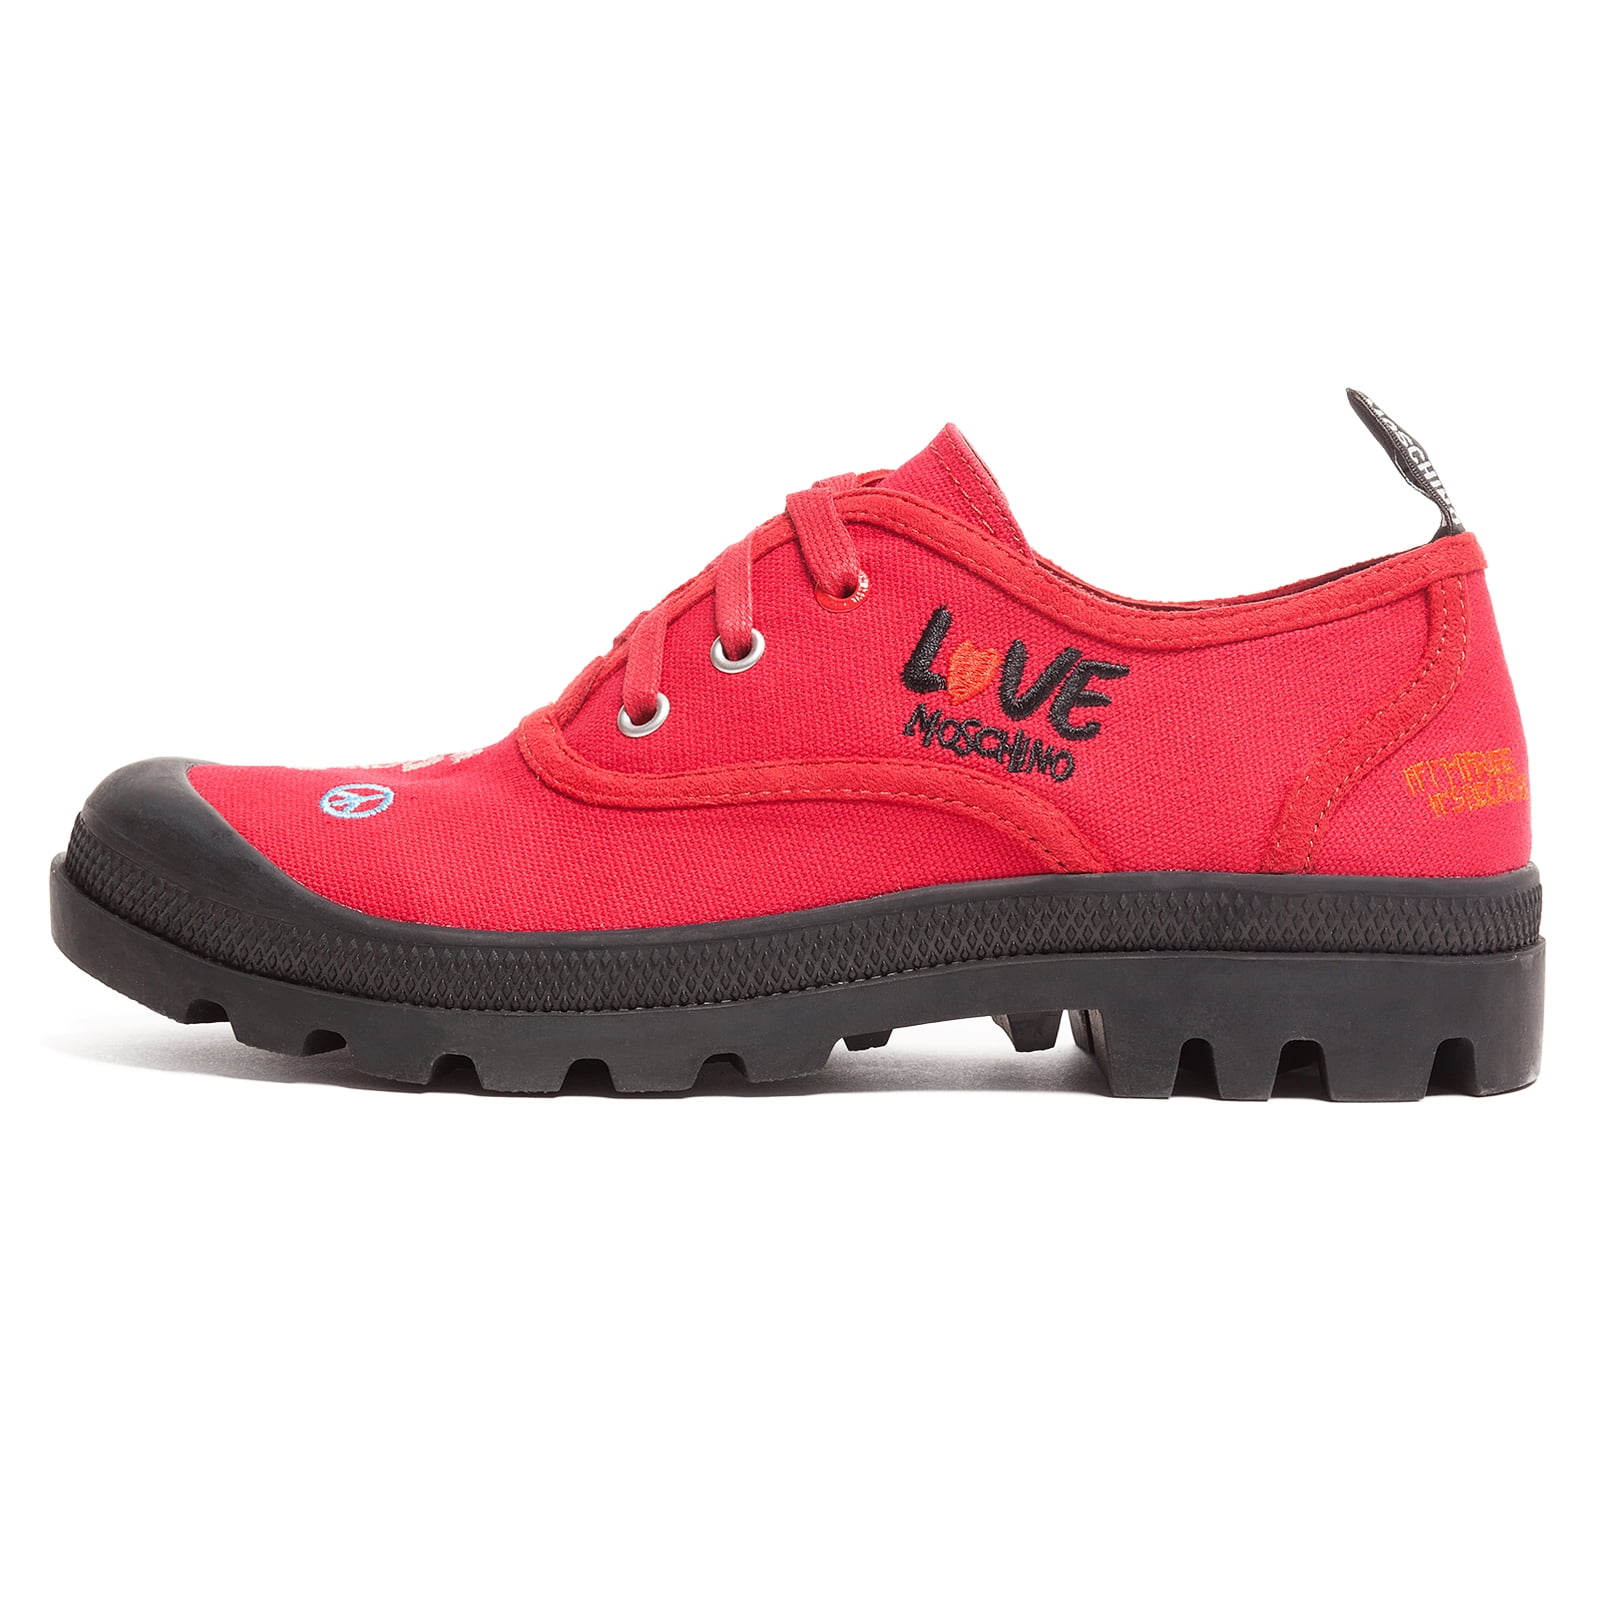 Moschino Love Moschino Red Lug Sole Embroidered Sneakers 